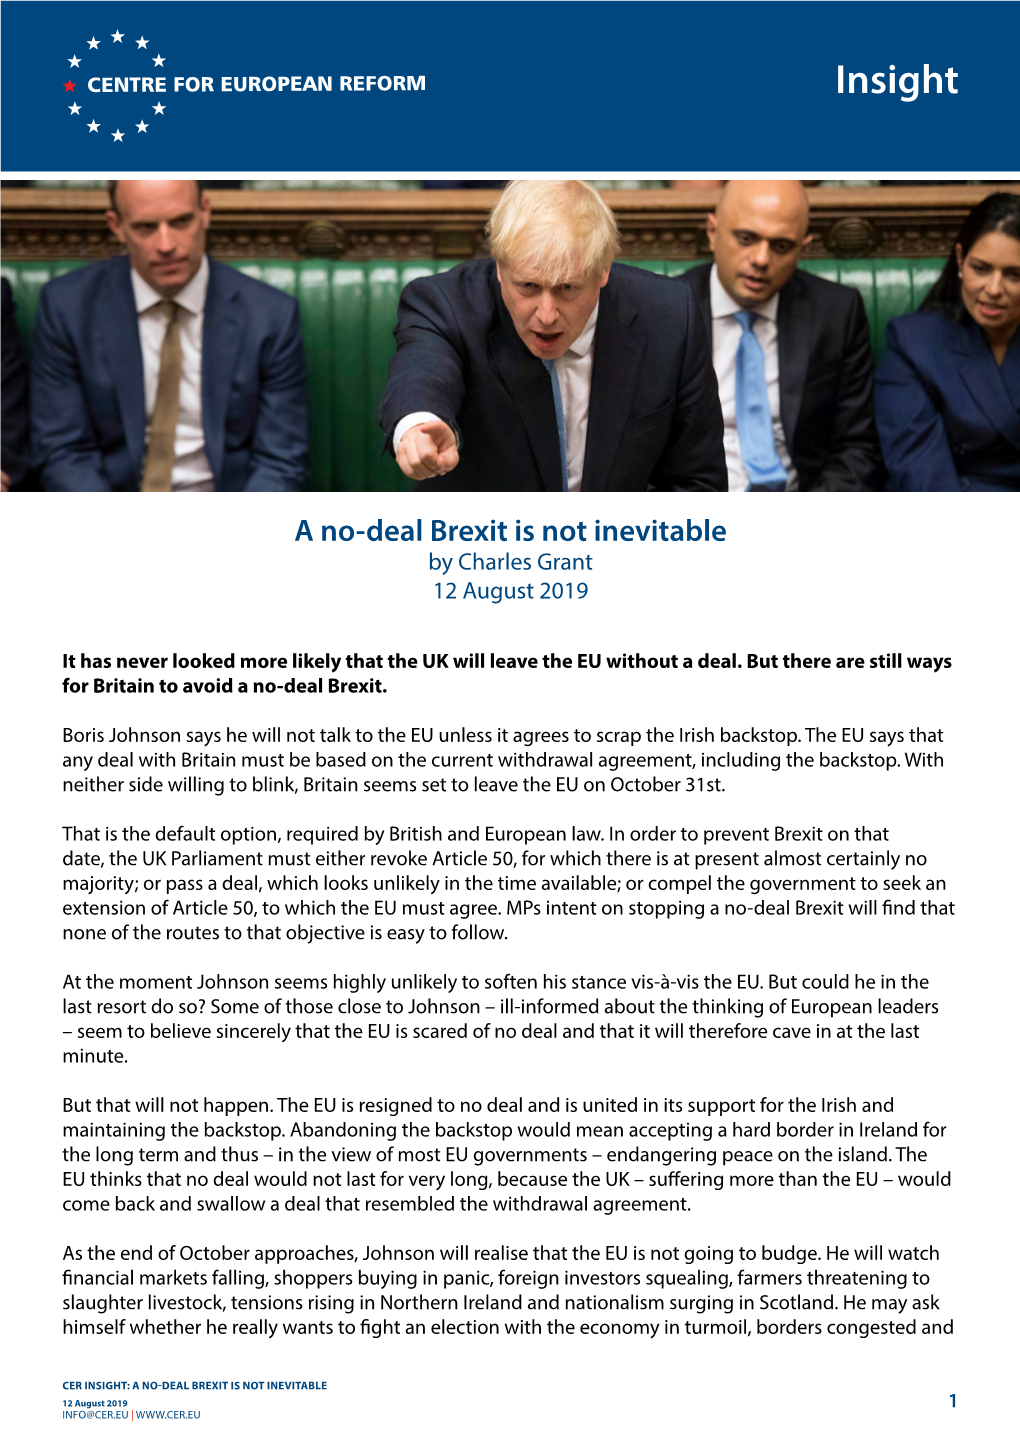 A No-Deal Brexit Is Not Inevitable by Charles Grant 12 August 2019